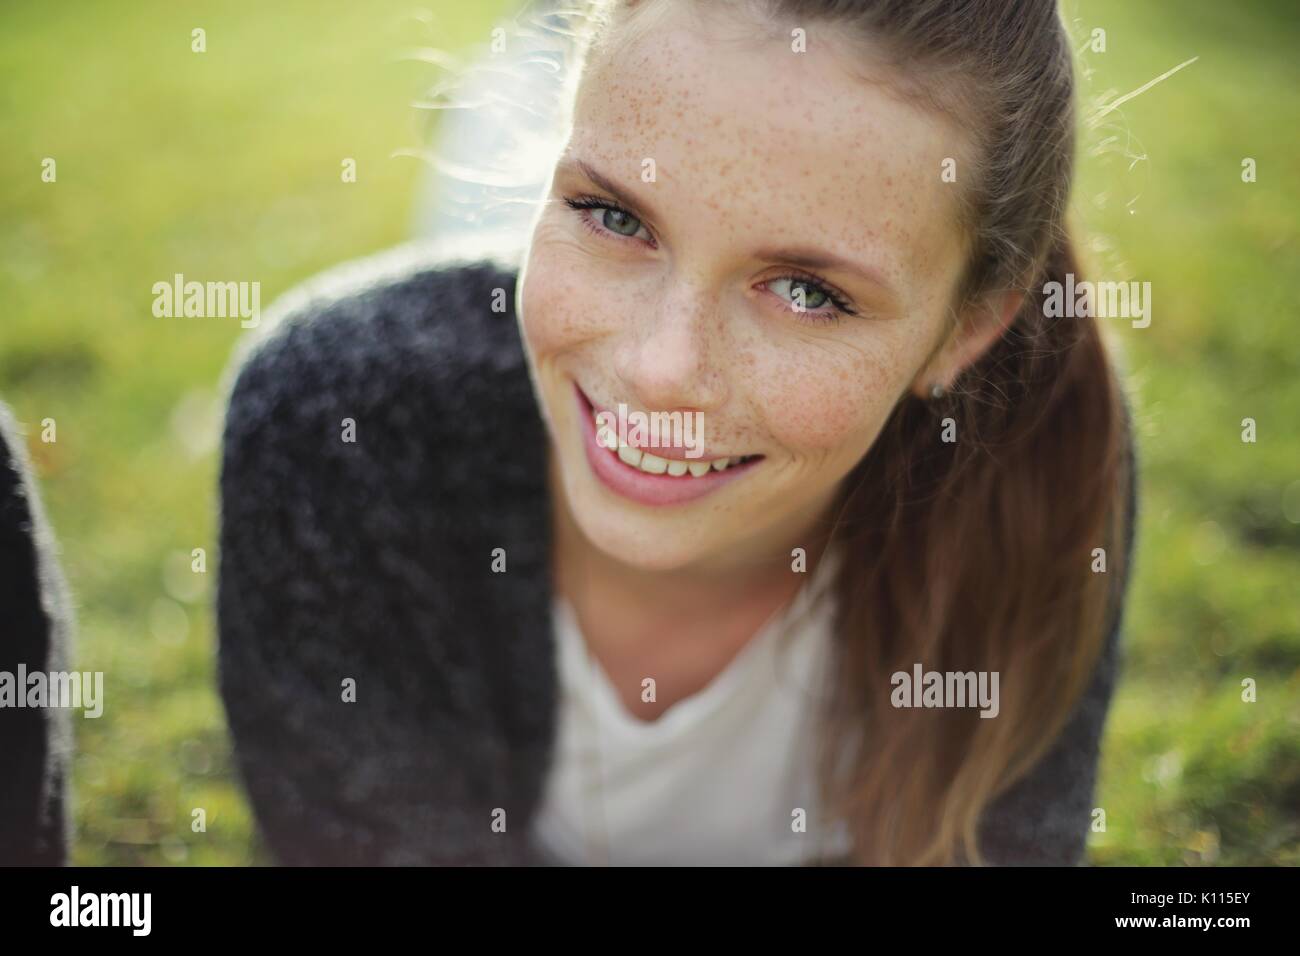 Portrait of a young woman with freckles Stock Photo